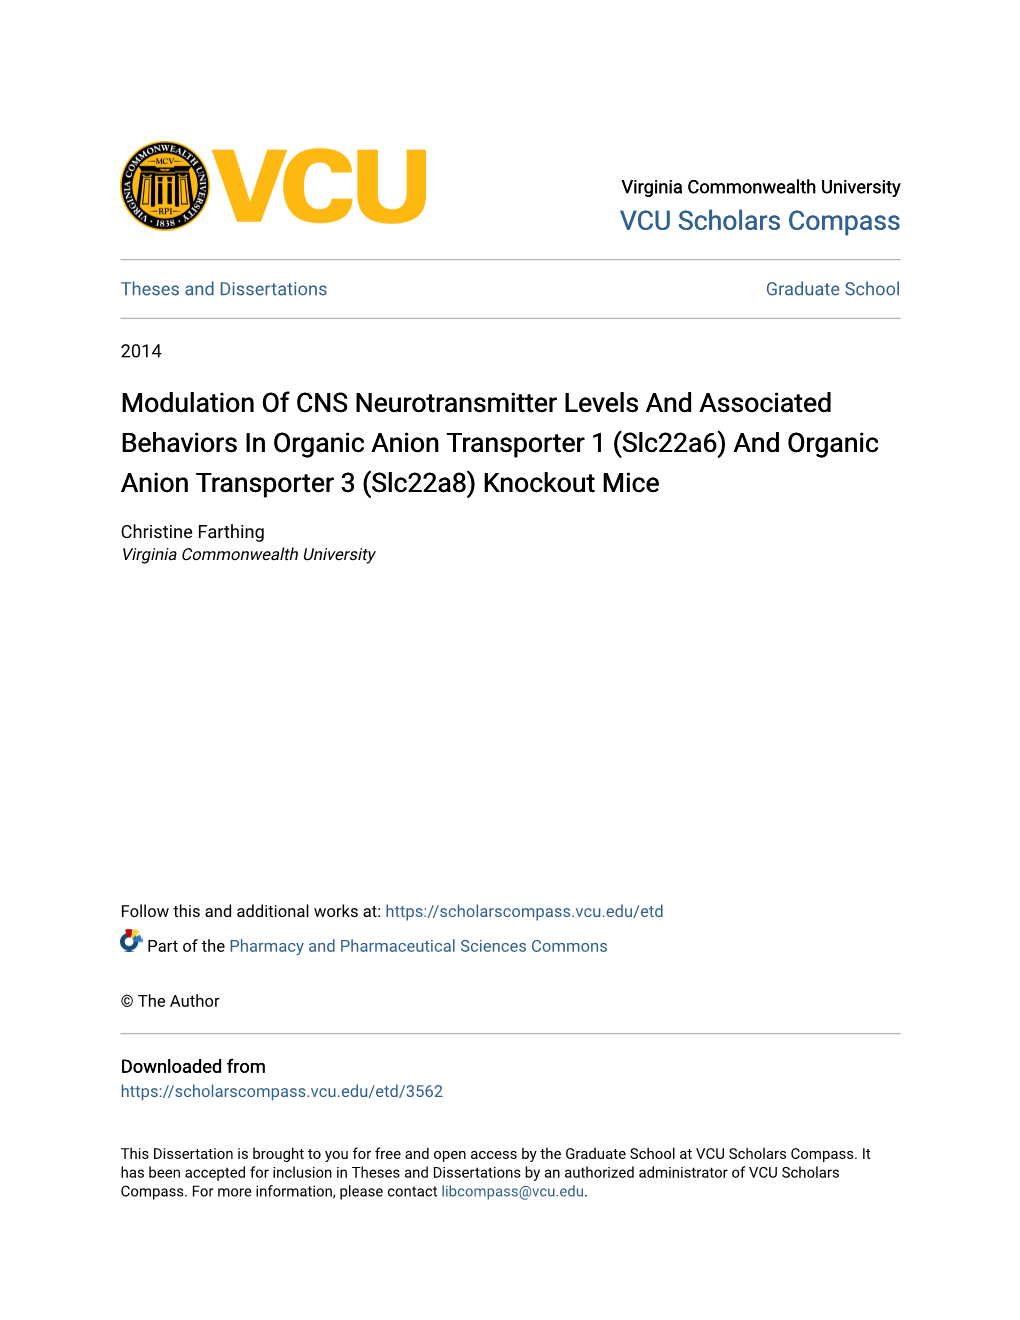 Modulation of CNS Neurotransmitter Levels and Associated Behaviors in Organic Anion Transporter 1 (Slc22a6) and Organic Anion Transporter 3 (Slc22a8) Knockout Mice